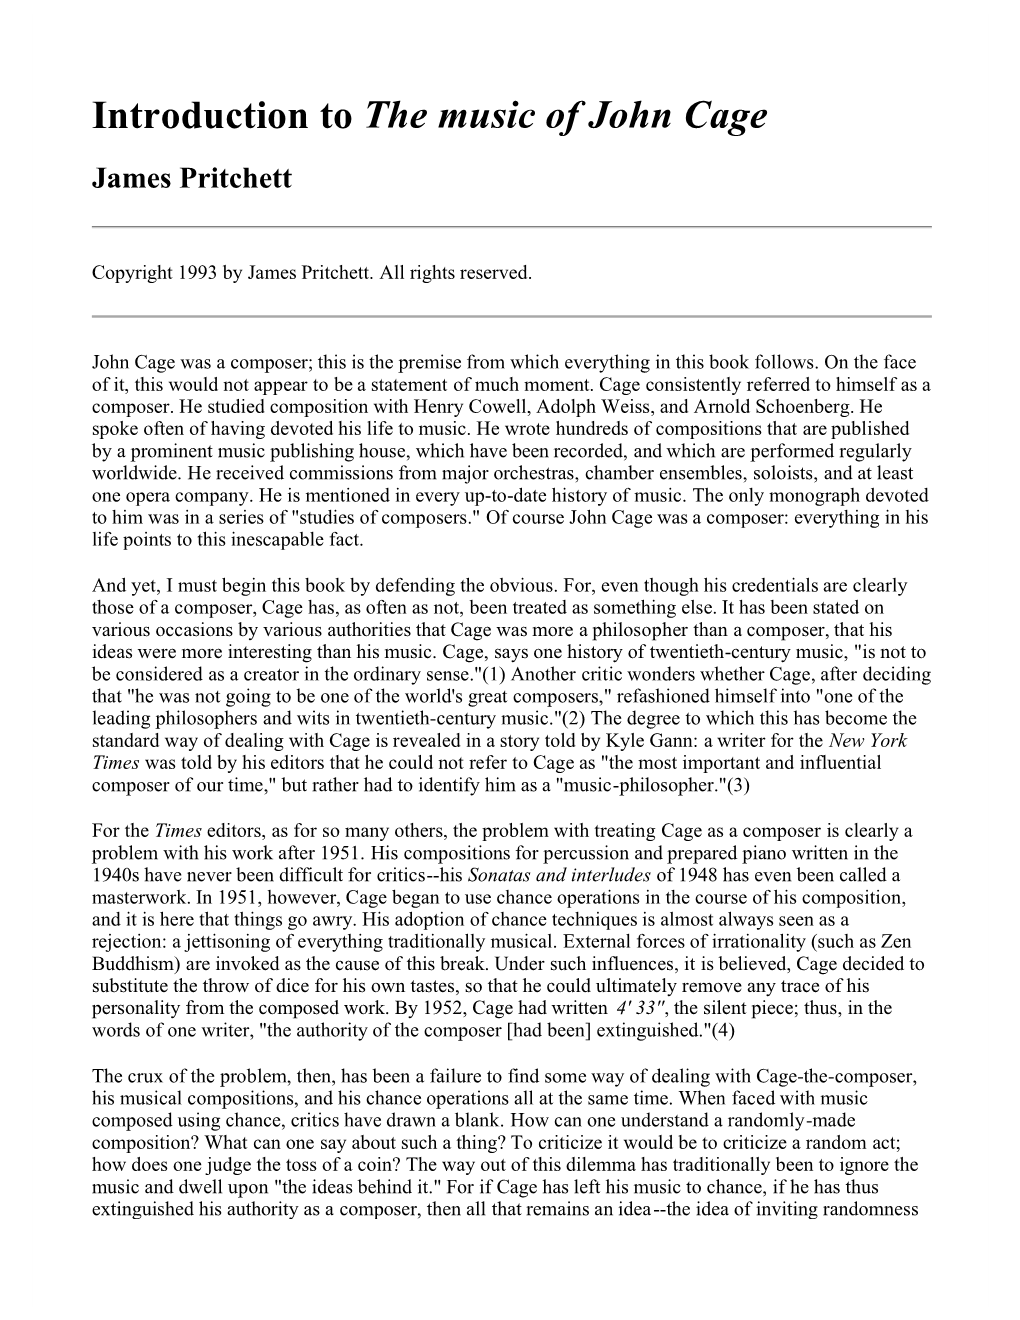 Introduction to the Music of John Cage James Pritchett